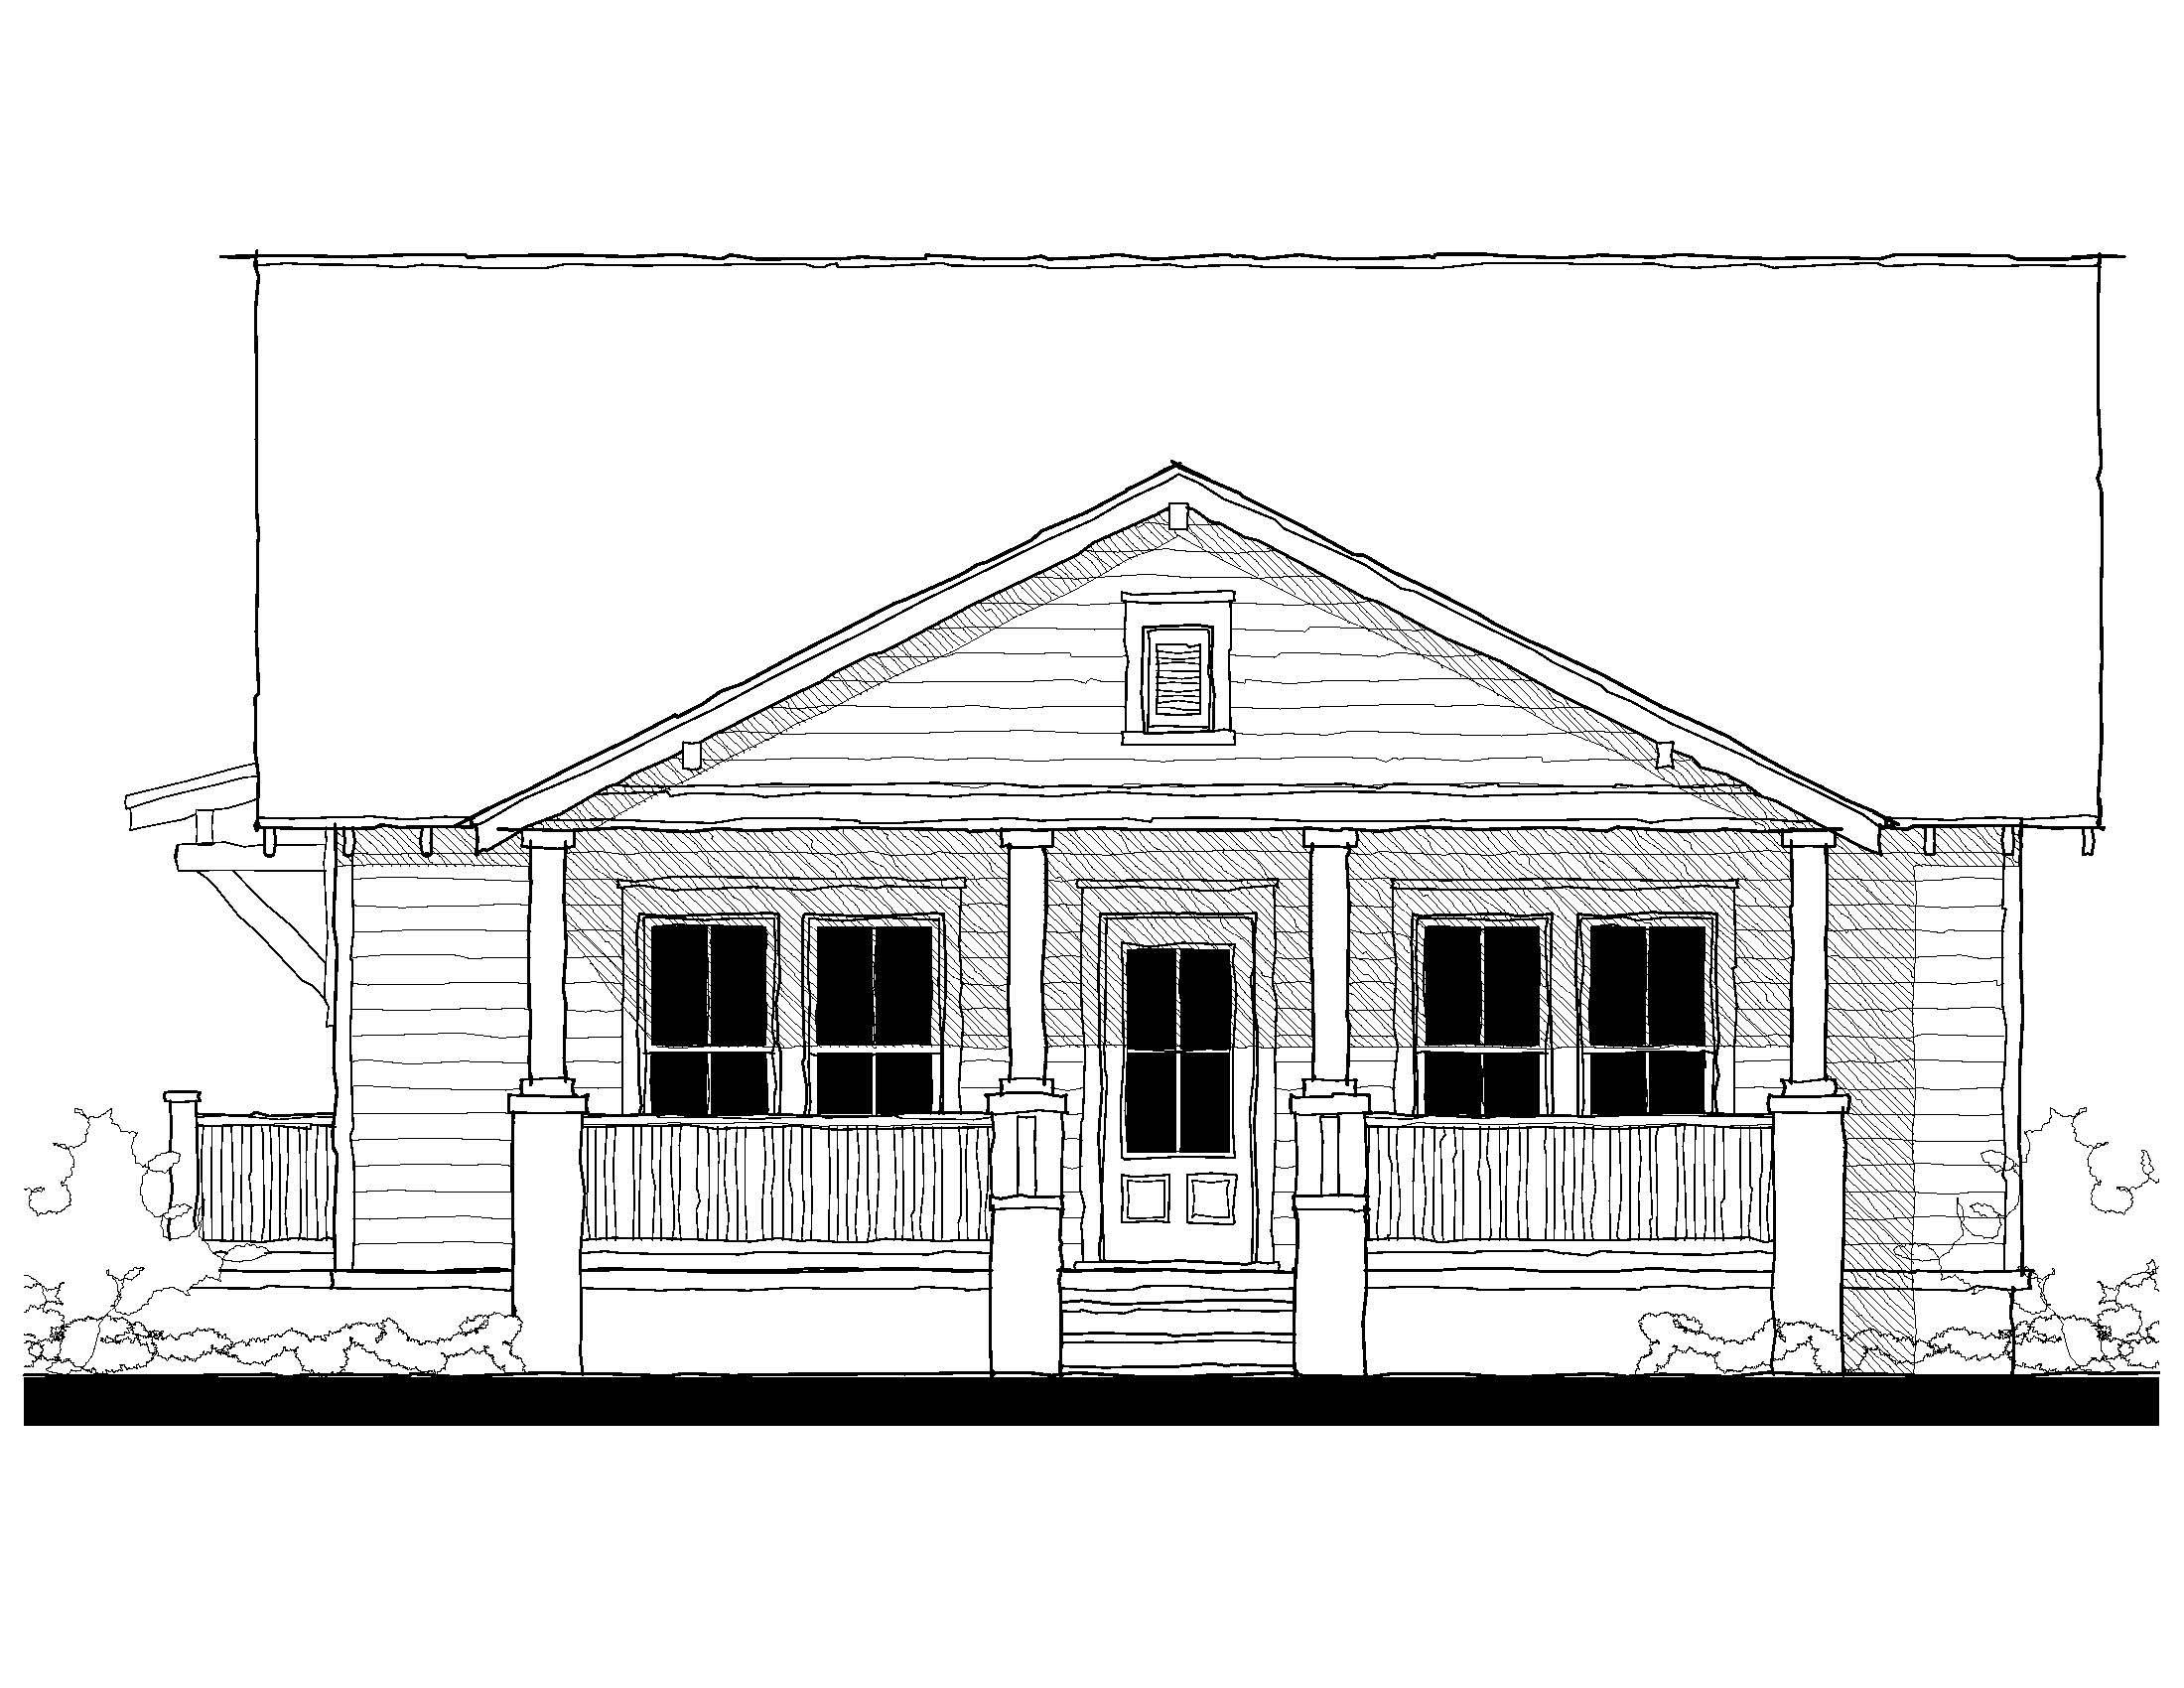 New Street Bungalow (10301A)